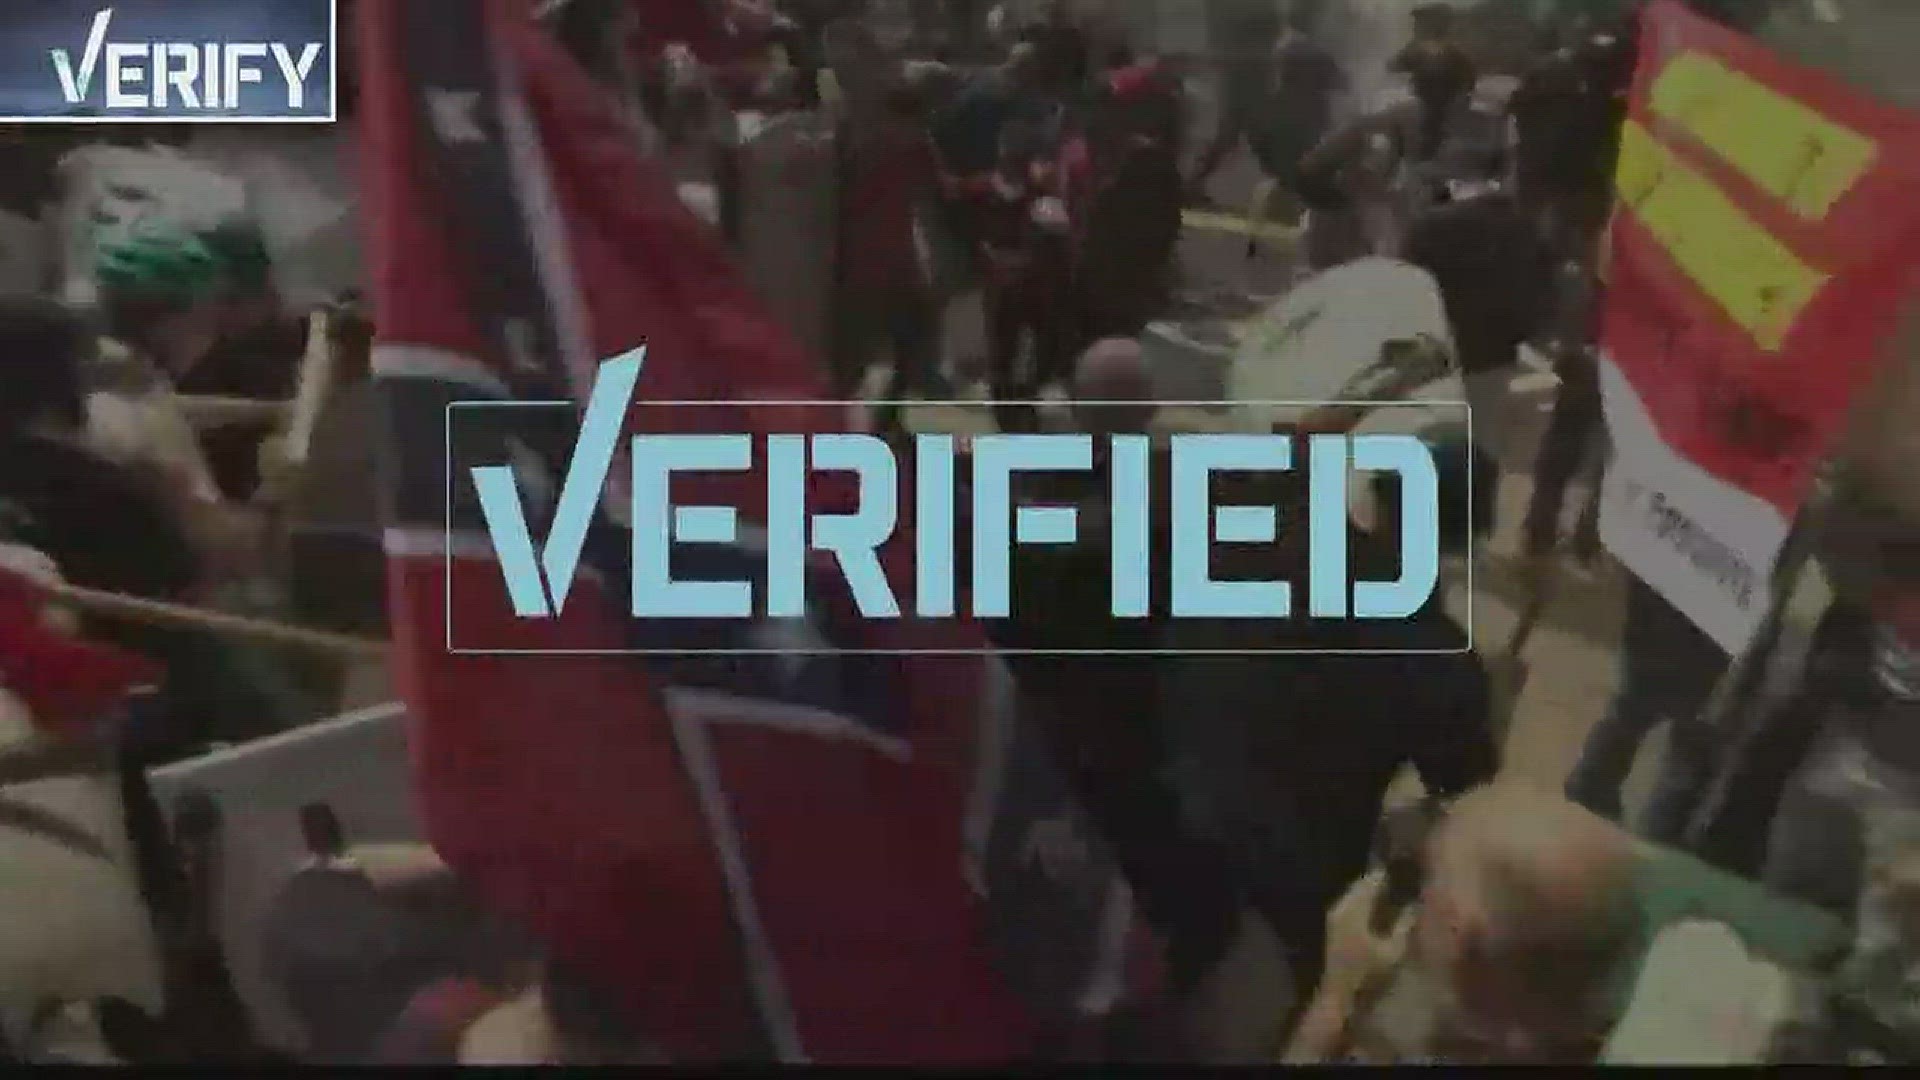 VERIFY: What is the alt-right? Are they affiliated with the political right?